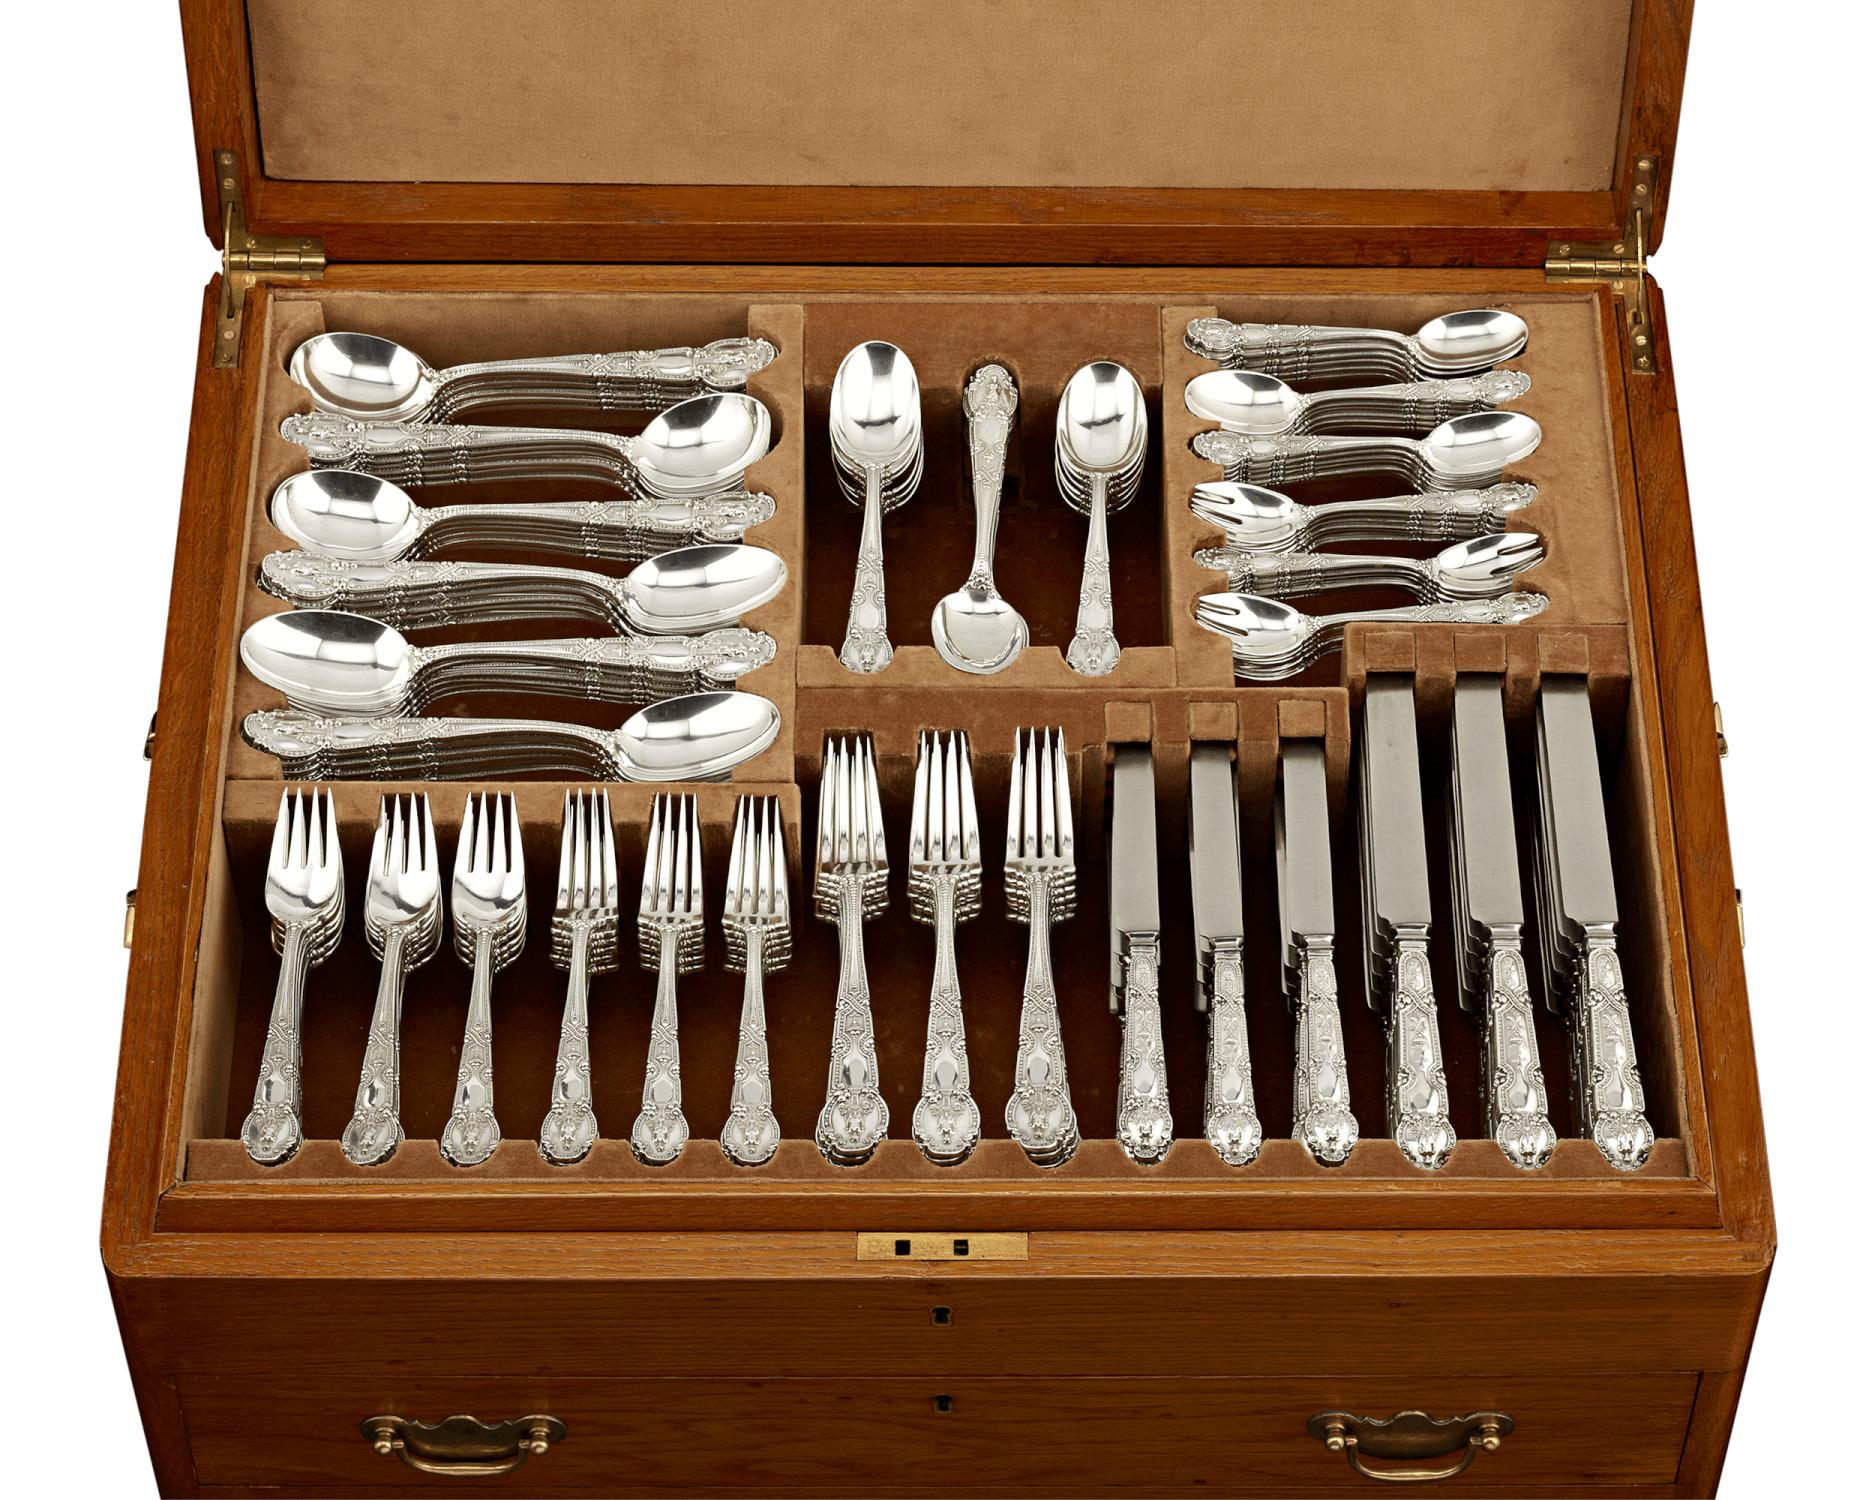 This magnificent and complete, 417-piece Tiffany & Co. silver flatware service for 18 is wrought in the romantic and classical Renaissance pattern. Designed by Tiffany’s master jewelry and silver designer Paulding Farnham and first produced in 1905,